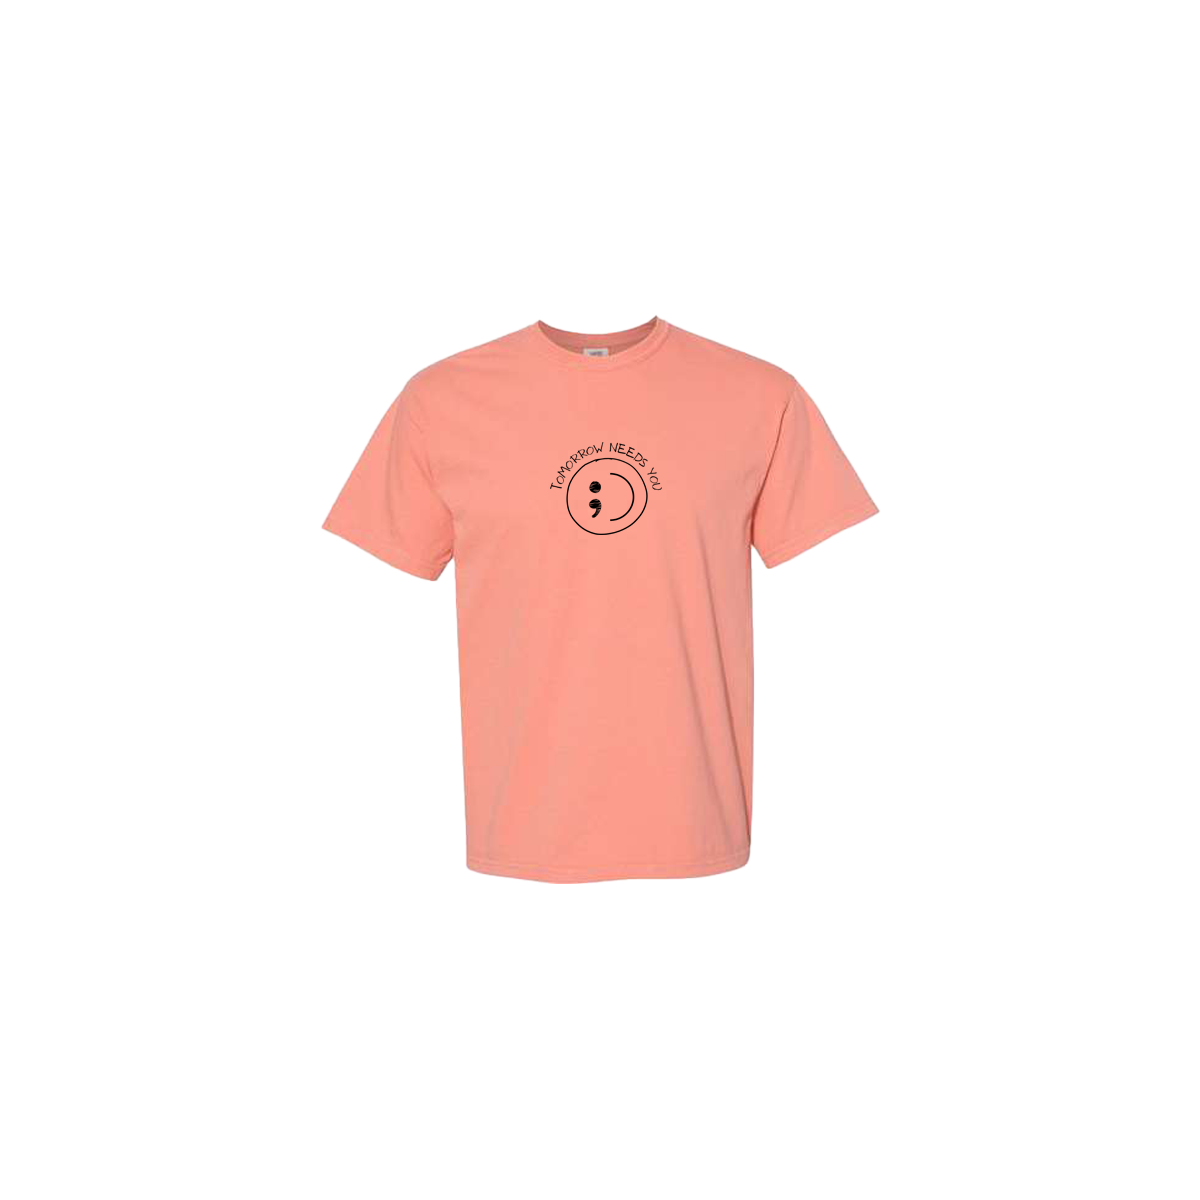 Tomorrow Needs You Embroidered Coral Tshirt - Mental Health Awareness Clothing